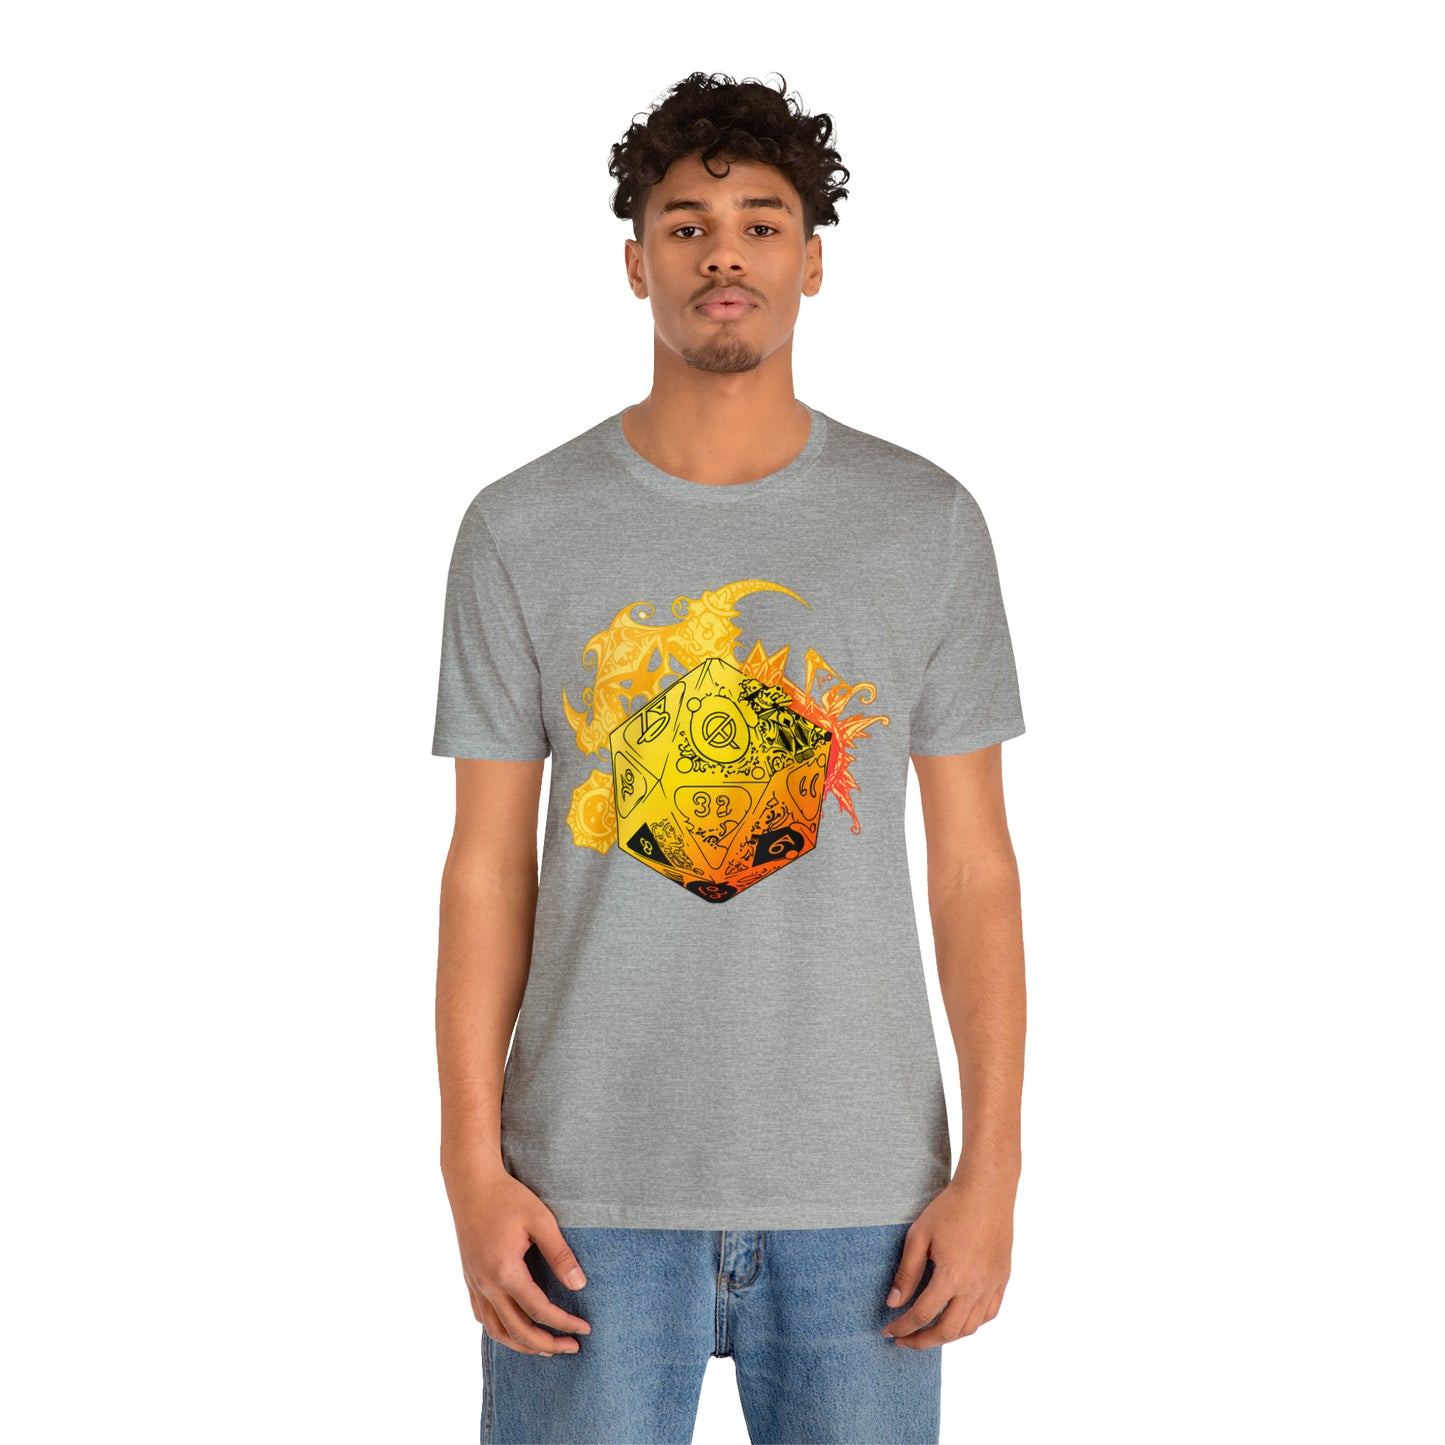 athletic-heather-quest-thread-tee-shirt-with-large-yellow-dragon-dice-on-center-of-shirt